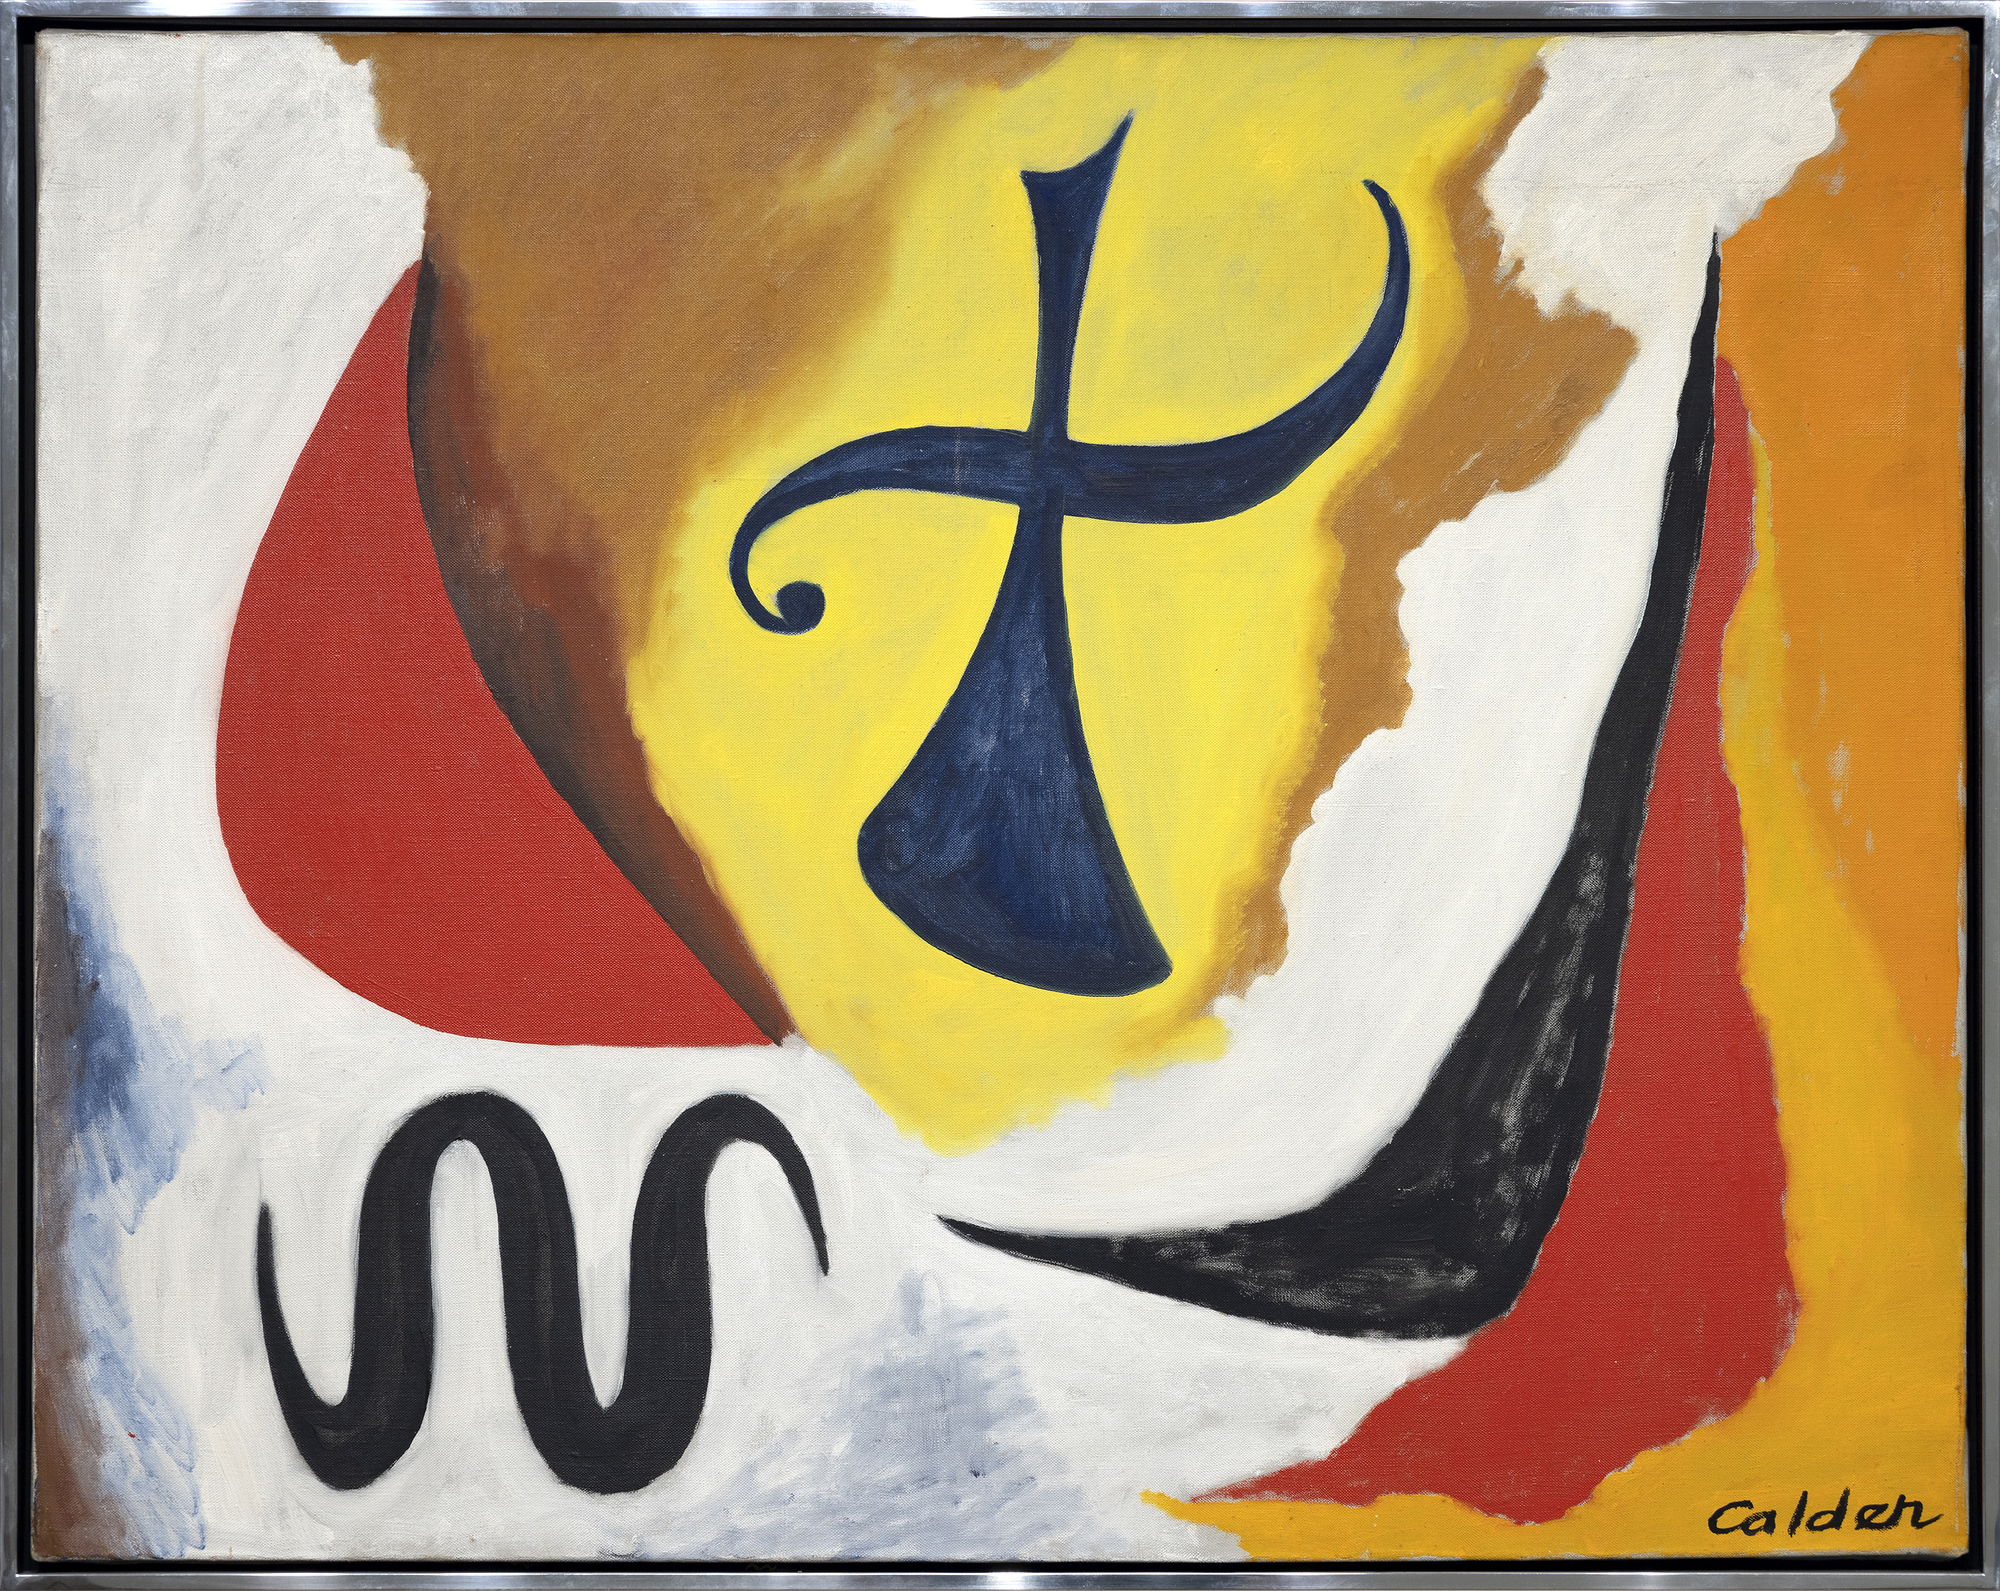 Alexander Calder executed a surprising number of oil paintings during the second half of the 1940s and early 1950s. By this time, the shock of his 1930 visit to Mondrian’s studio, where he was impressed not by the paintings but by the environment, had developed into an artistic language of Calder’s own. So, as Calder was painting The Cross in 1948, he was already on the cusp of international recognition and on his way to winning the XX VI Venice Biennale’s grand prize for sculpture in 1952. Working on his paintings in concert with his sculptural practice, Calder approached both mediums with the same formal language and mastery of shape and color.<br><br>Calder was deeply intrigued by the unseen forces that keep objects in motion. Taking this interest from sculpture to canvas, we see that Calder built a sense of torque within The Cross by shifting its planes and balance. Using these elements, he created implied motion suggesting that the figure is pressing forward or even descending from the skies above. The Cross’s determined momentum is further amplified by details such as the subject’s emphatically outstretched arms, the fist-like curlicue vector on the left, and the silhouetted serpentine figure.<br><br>Calder also adopts a strong thread of poetic abandon throughout The Cross’s surface. It resonates with his good friend Miró’s hieratic and distinctly personal visual language, but it is all Calder in the effective animation of this painting’s various elements. No artist has earned more poetic license than Calder, and throughout his career, the artist remained convivially flexible in his understanding of form and composition. He even welcomed the myriad interpretations of others, writing in 1951, “That others grasp what I have in mind seems unessential, at least as long as they have something else in theirs.”<br><br>Either way, it is important to remember that The Cross was painted shortly after the upheaval of the Second World War and to some appears to be a sobering reflection of the time. Most of all, The Cross proves that Alexander Calder loaded his brush first to work out ideas about form, structure, relationships in space, and most importantly, movement.